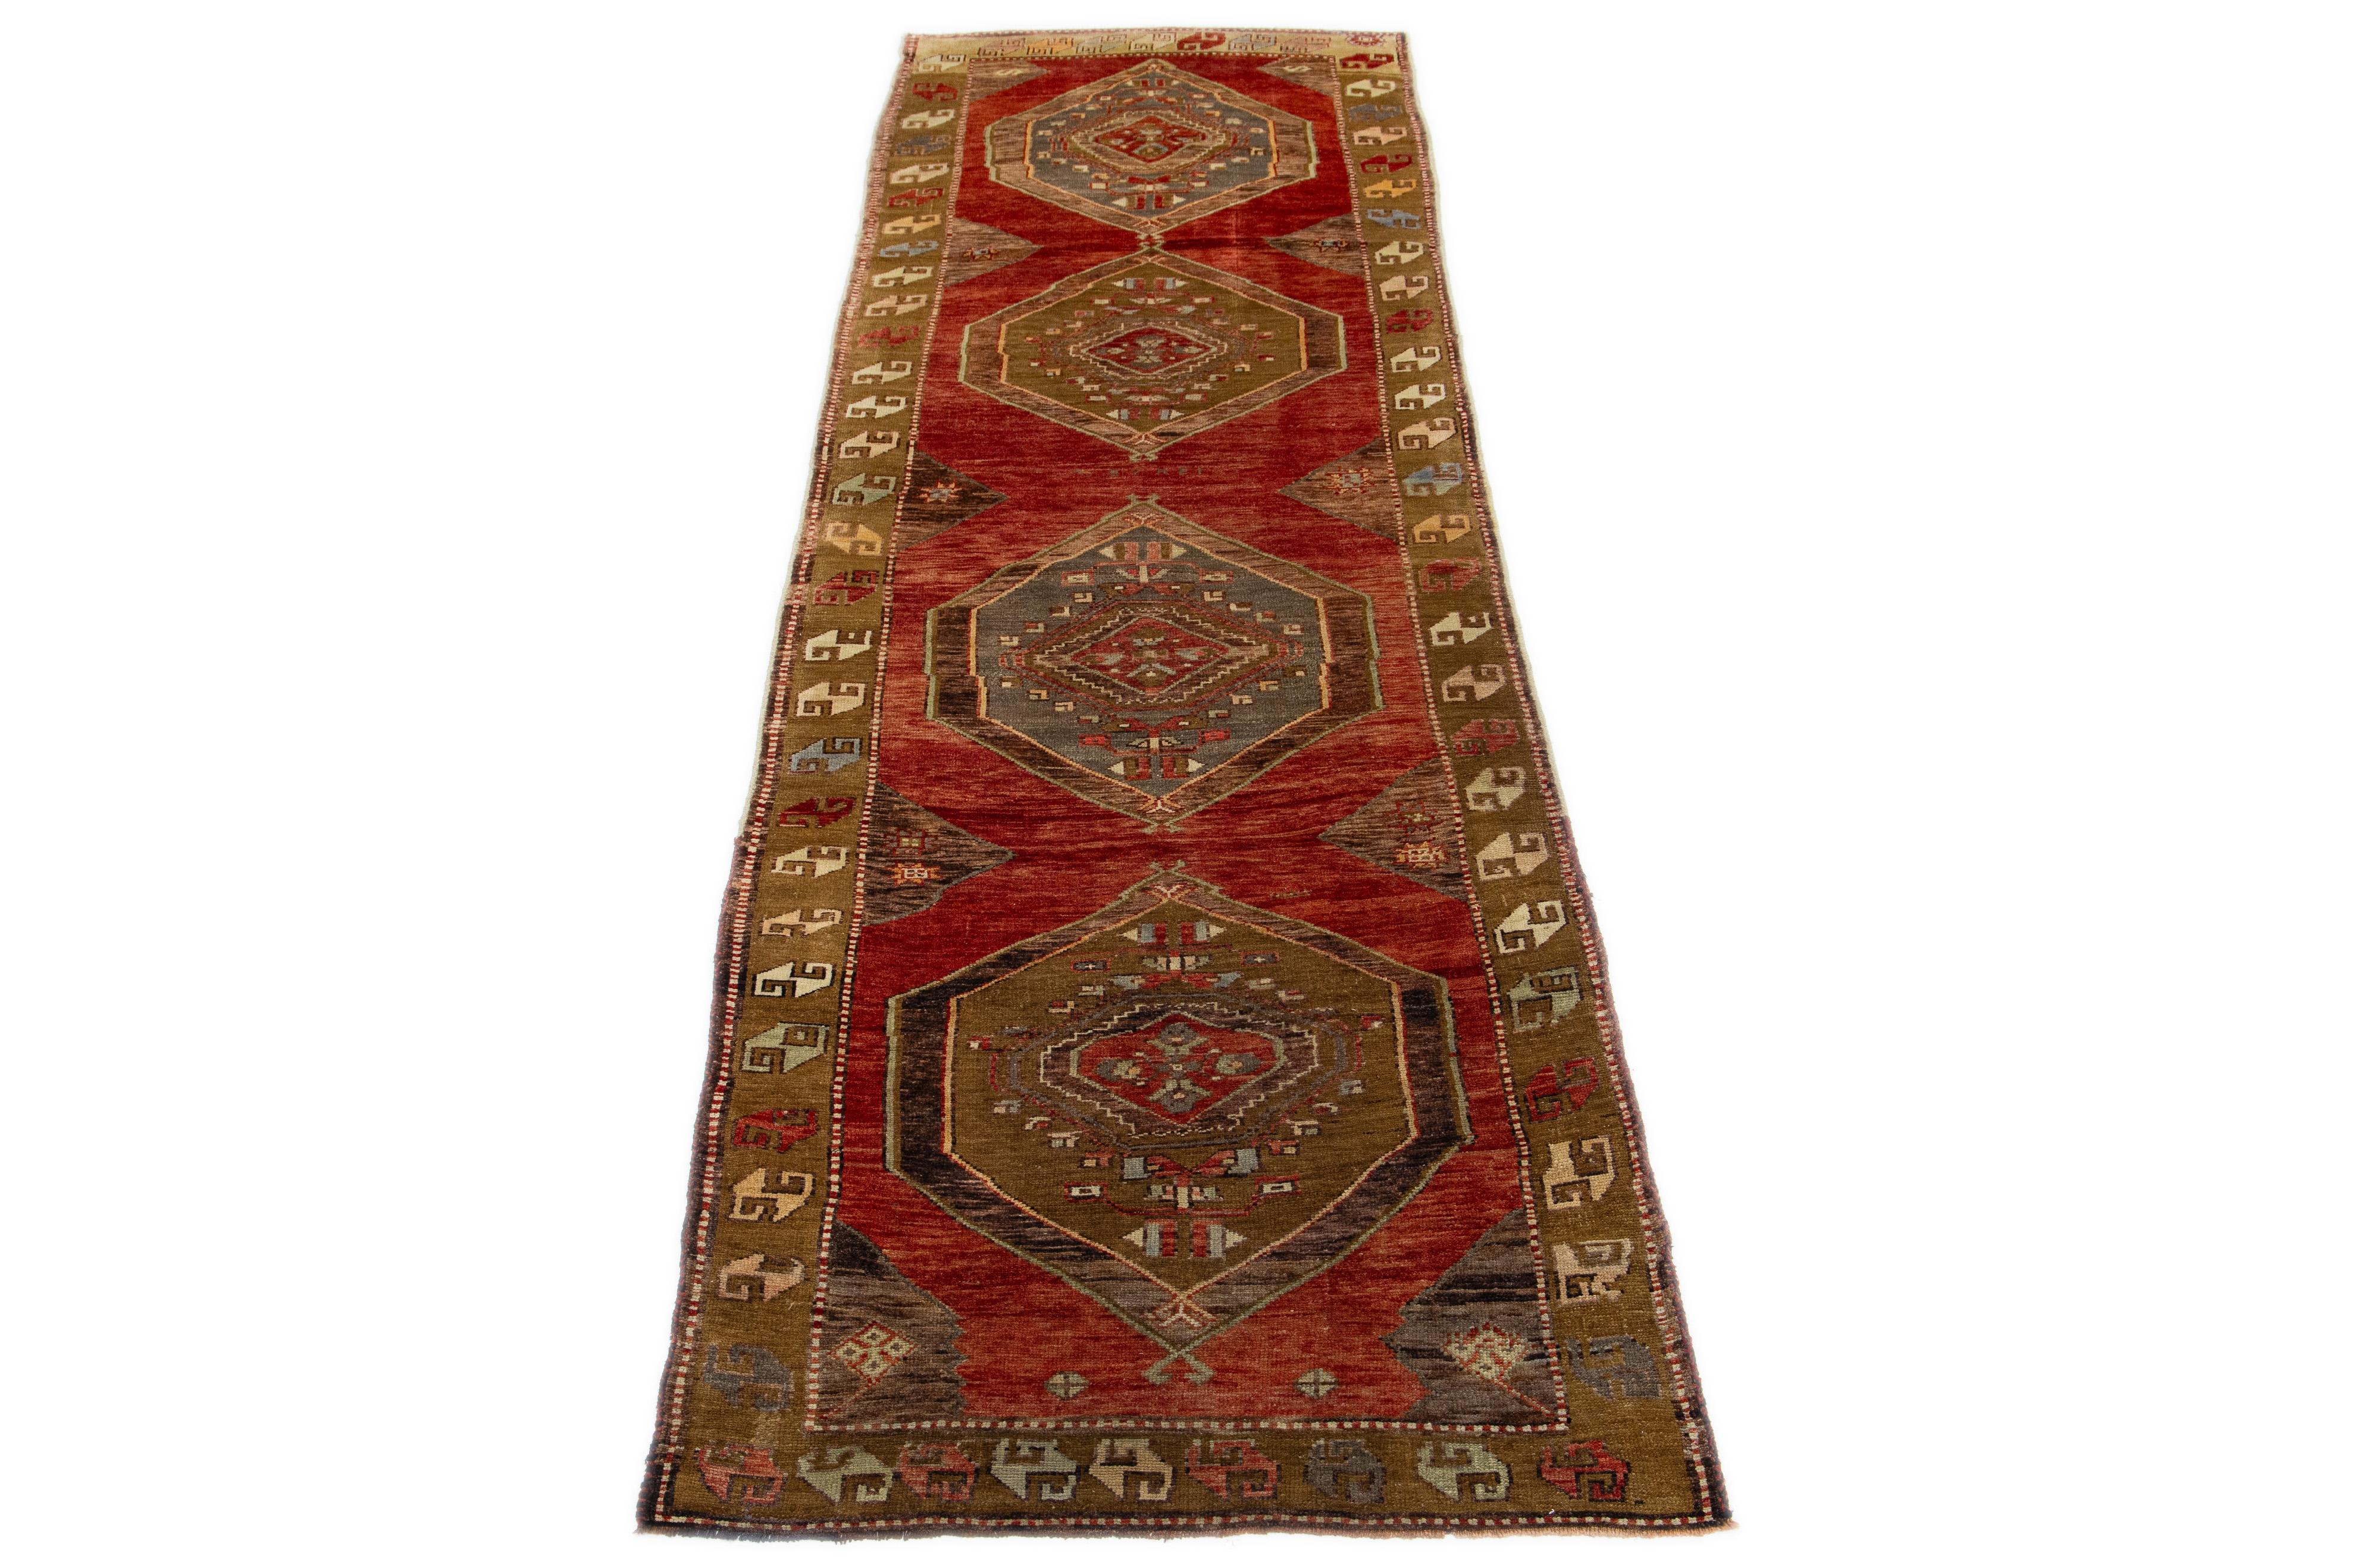 Beautiful vintage Karajah hand-knotted Wool rug with a rust color field. This Kalajah rug has multi-color accents in a gorgeous all-over geometric design.

This rug measures 3'8